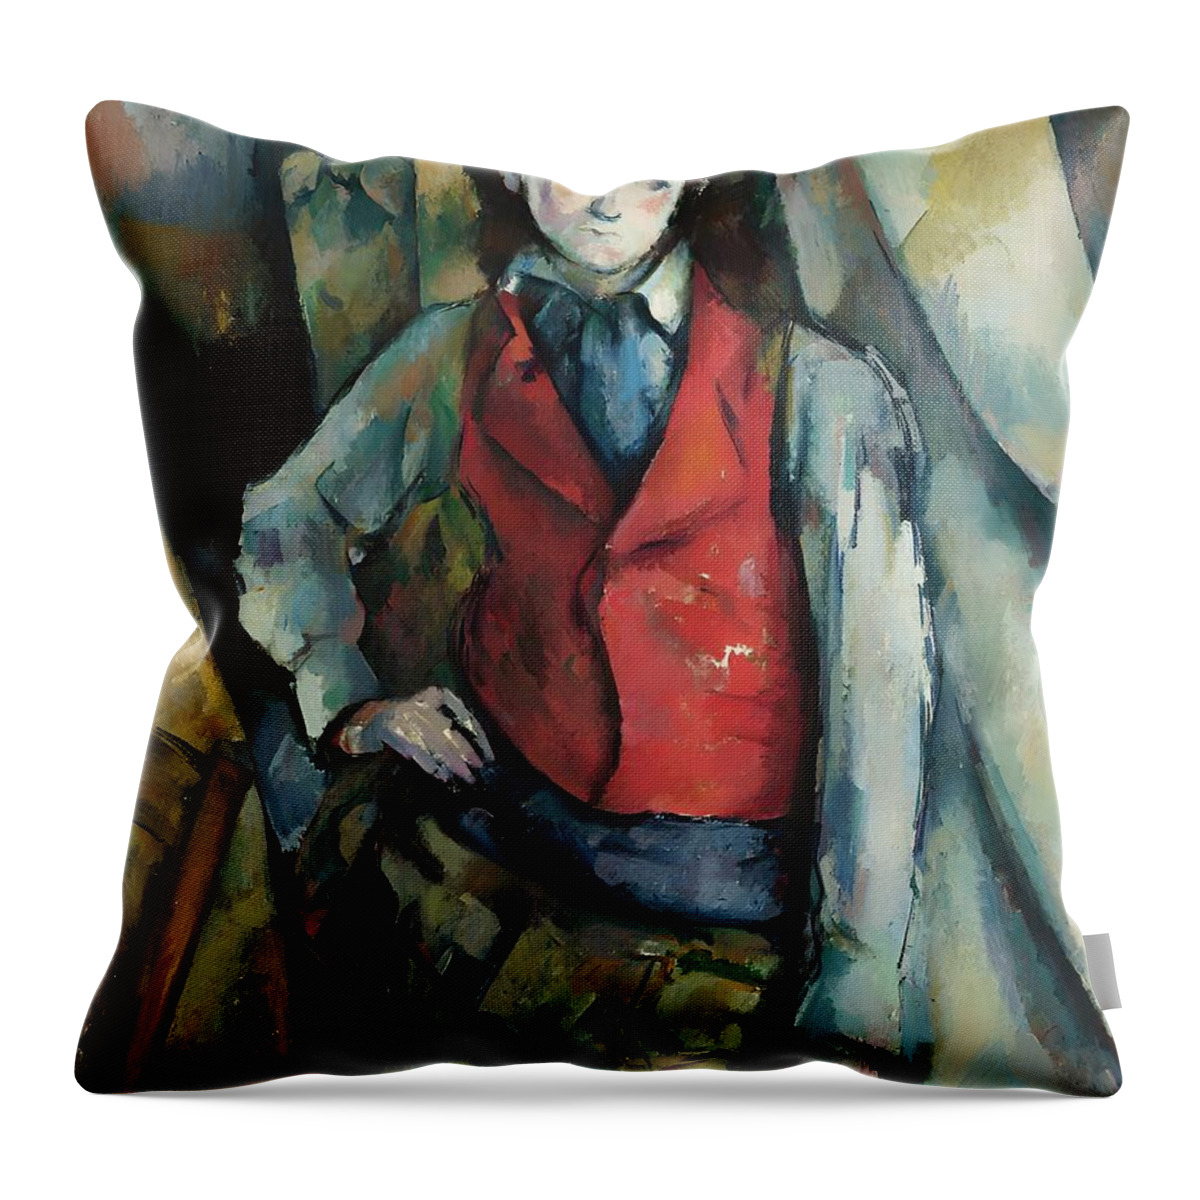 Paul Cezanne Throw Pillow featuring the painting Boy in a Red Waistcoat by Paul Cezanne by Mango Art